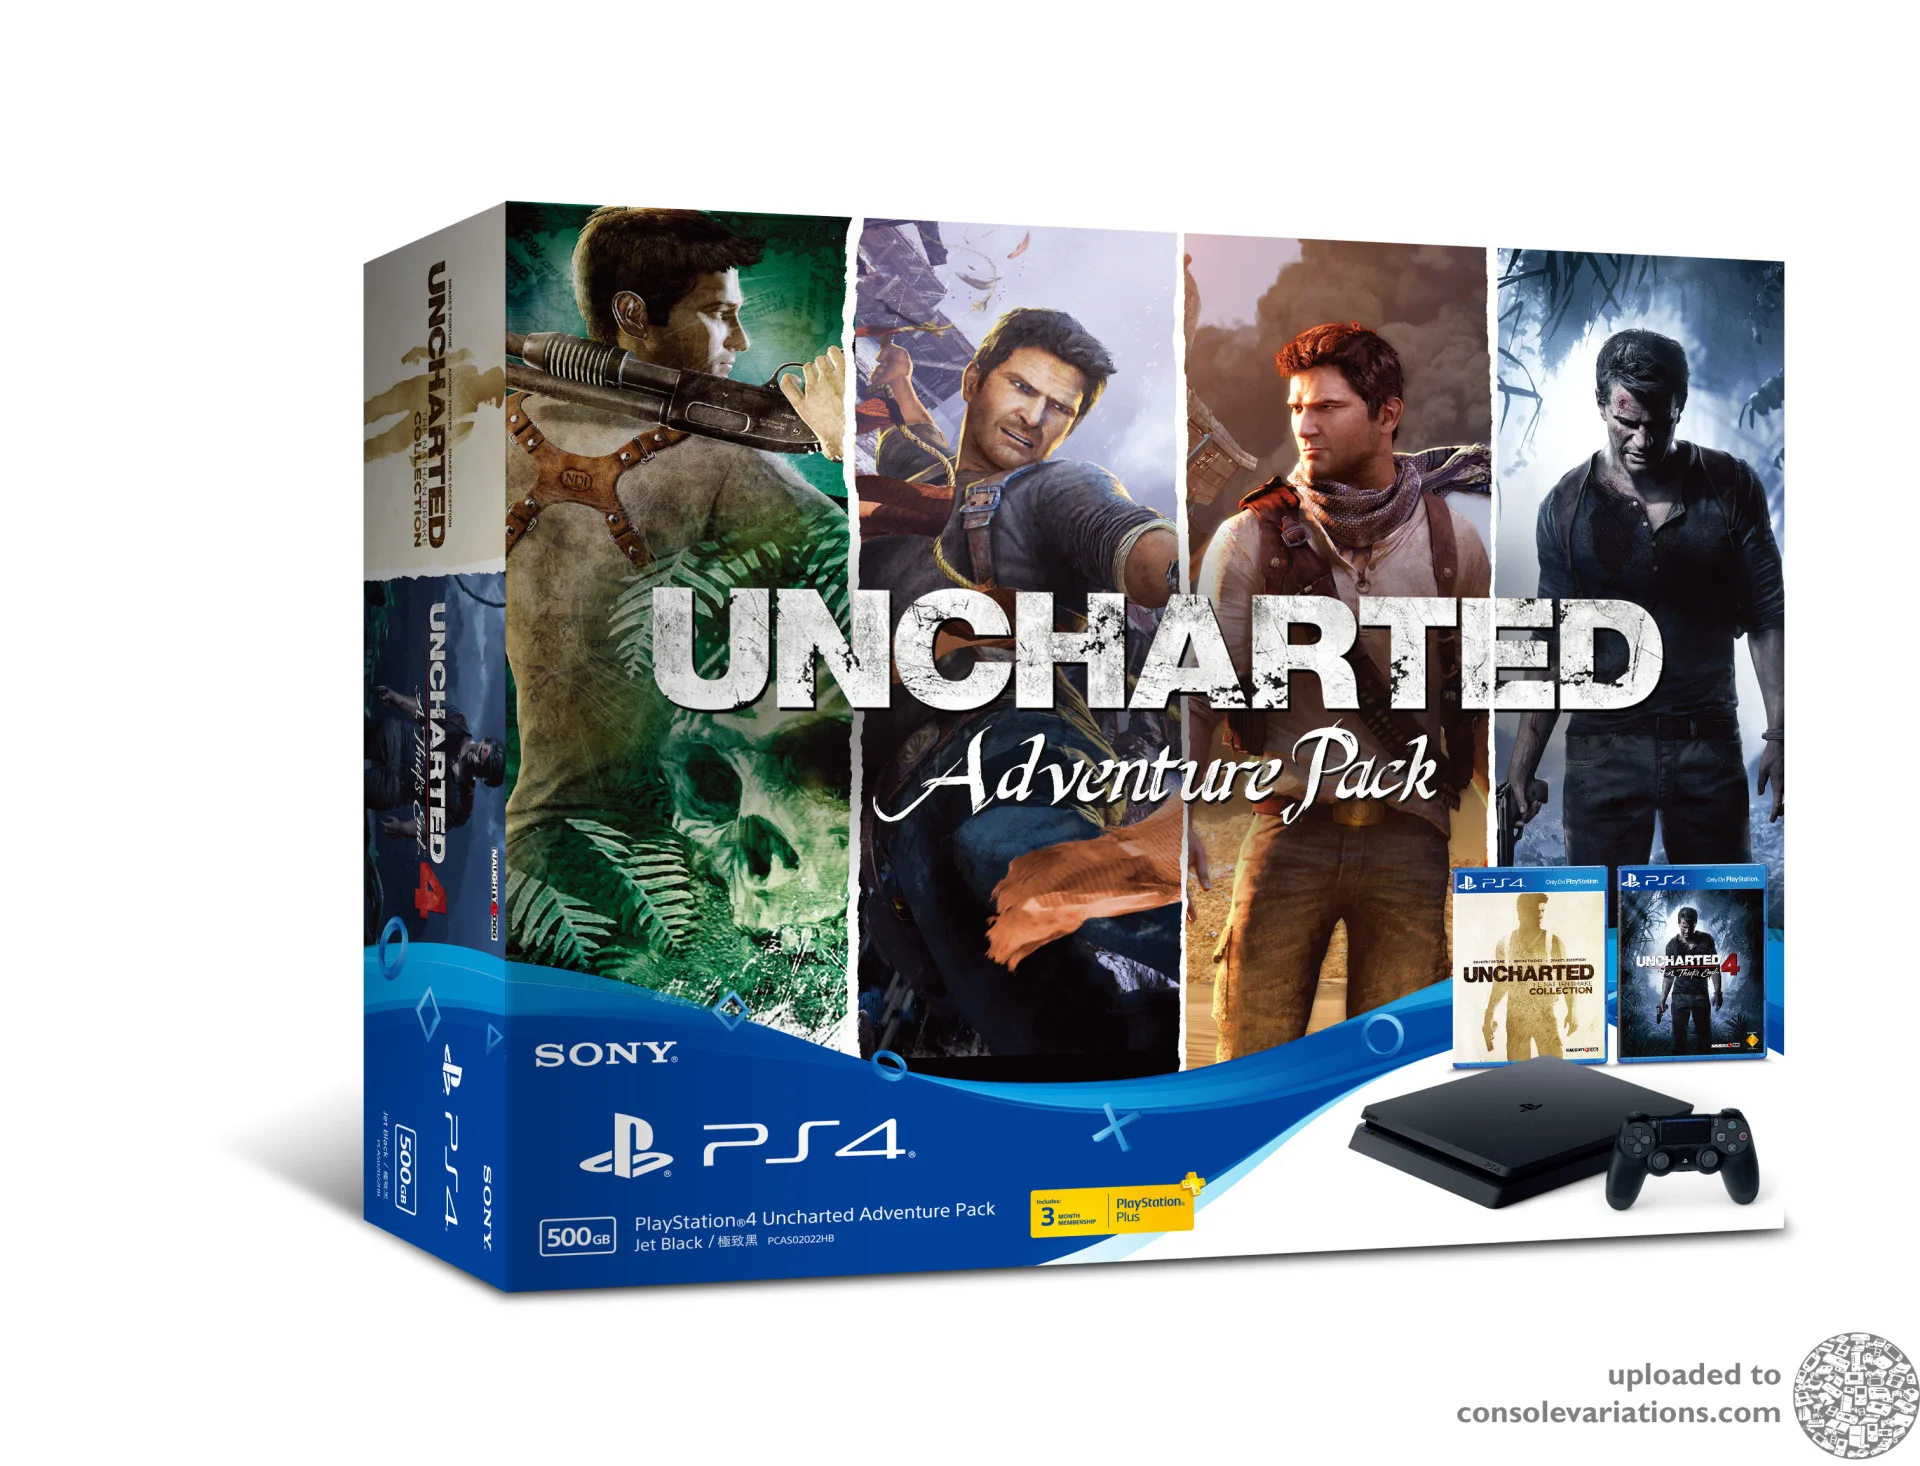  Sony PlayStation 4 Slim Uncharted Adventure Pack